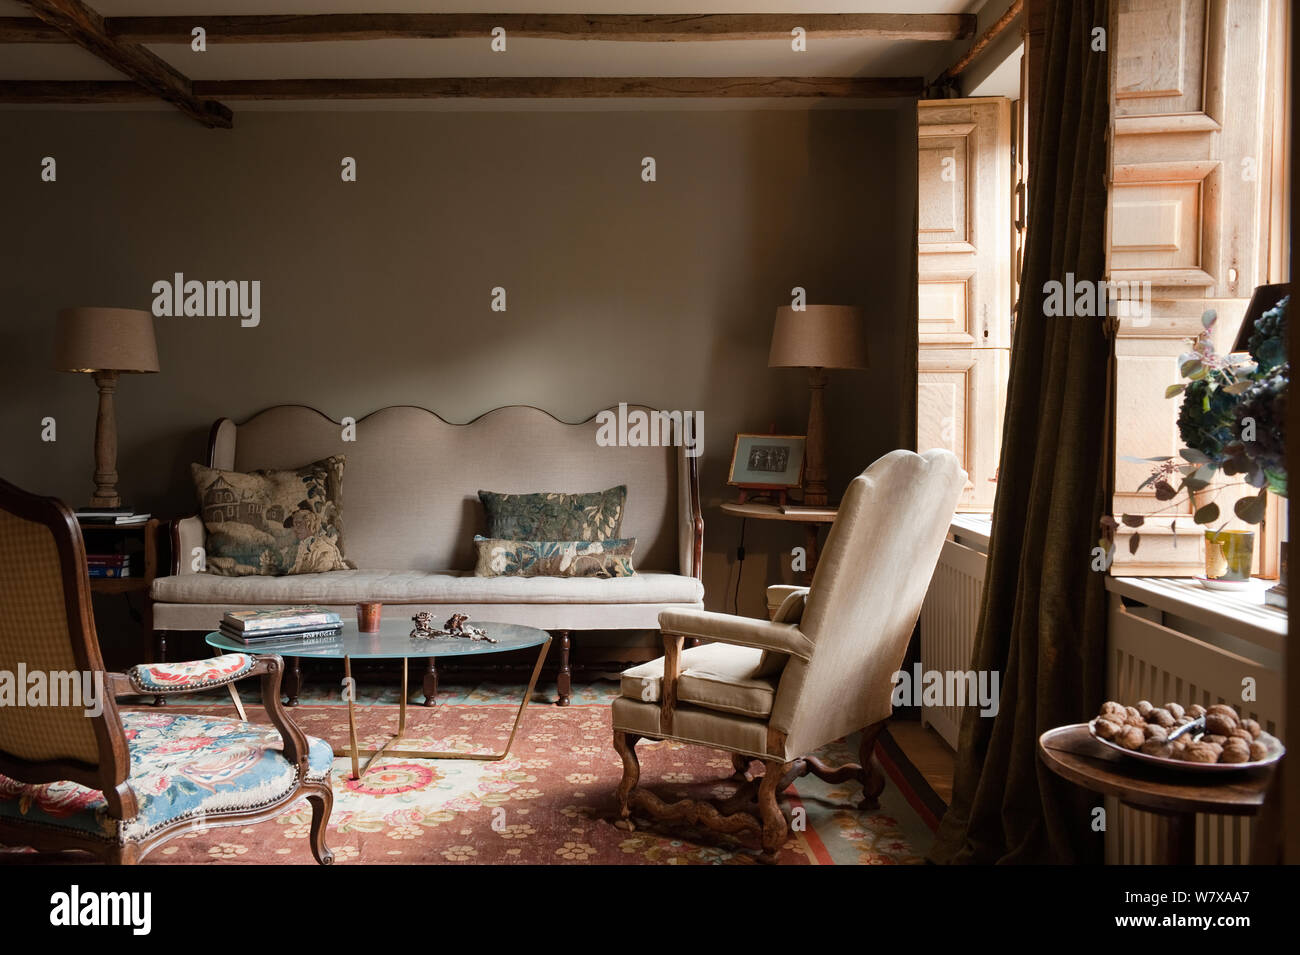 Sofa In Country Style Living Room Stock Photo Alamy